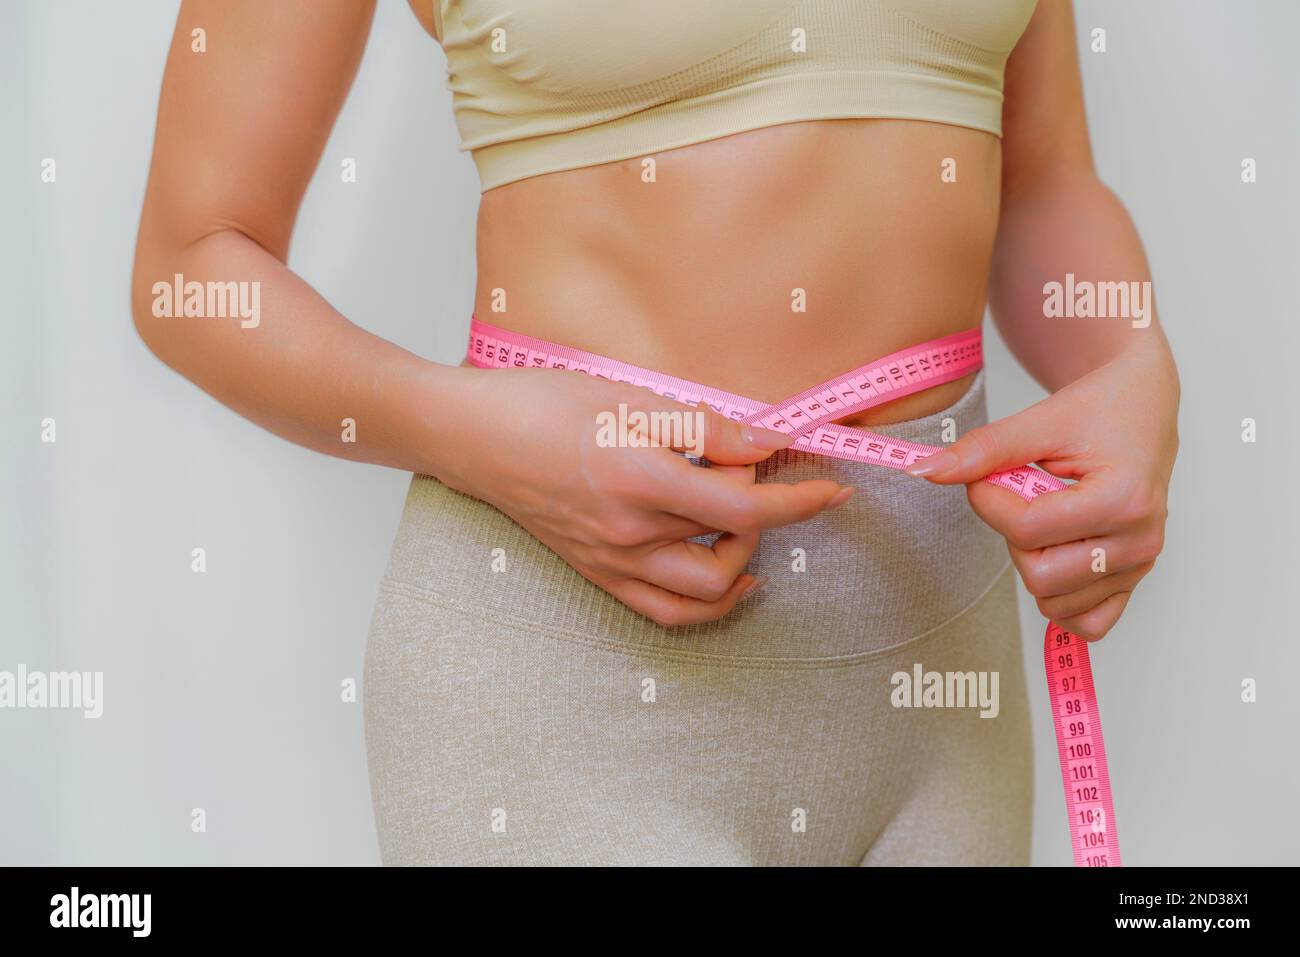 Premium Photo  A slender woman measures her waist with a measuring tape  the concept of weight loss